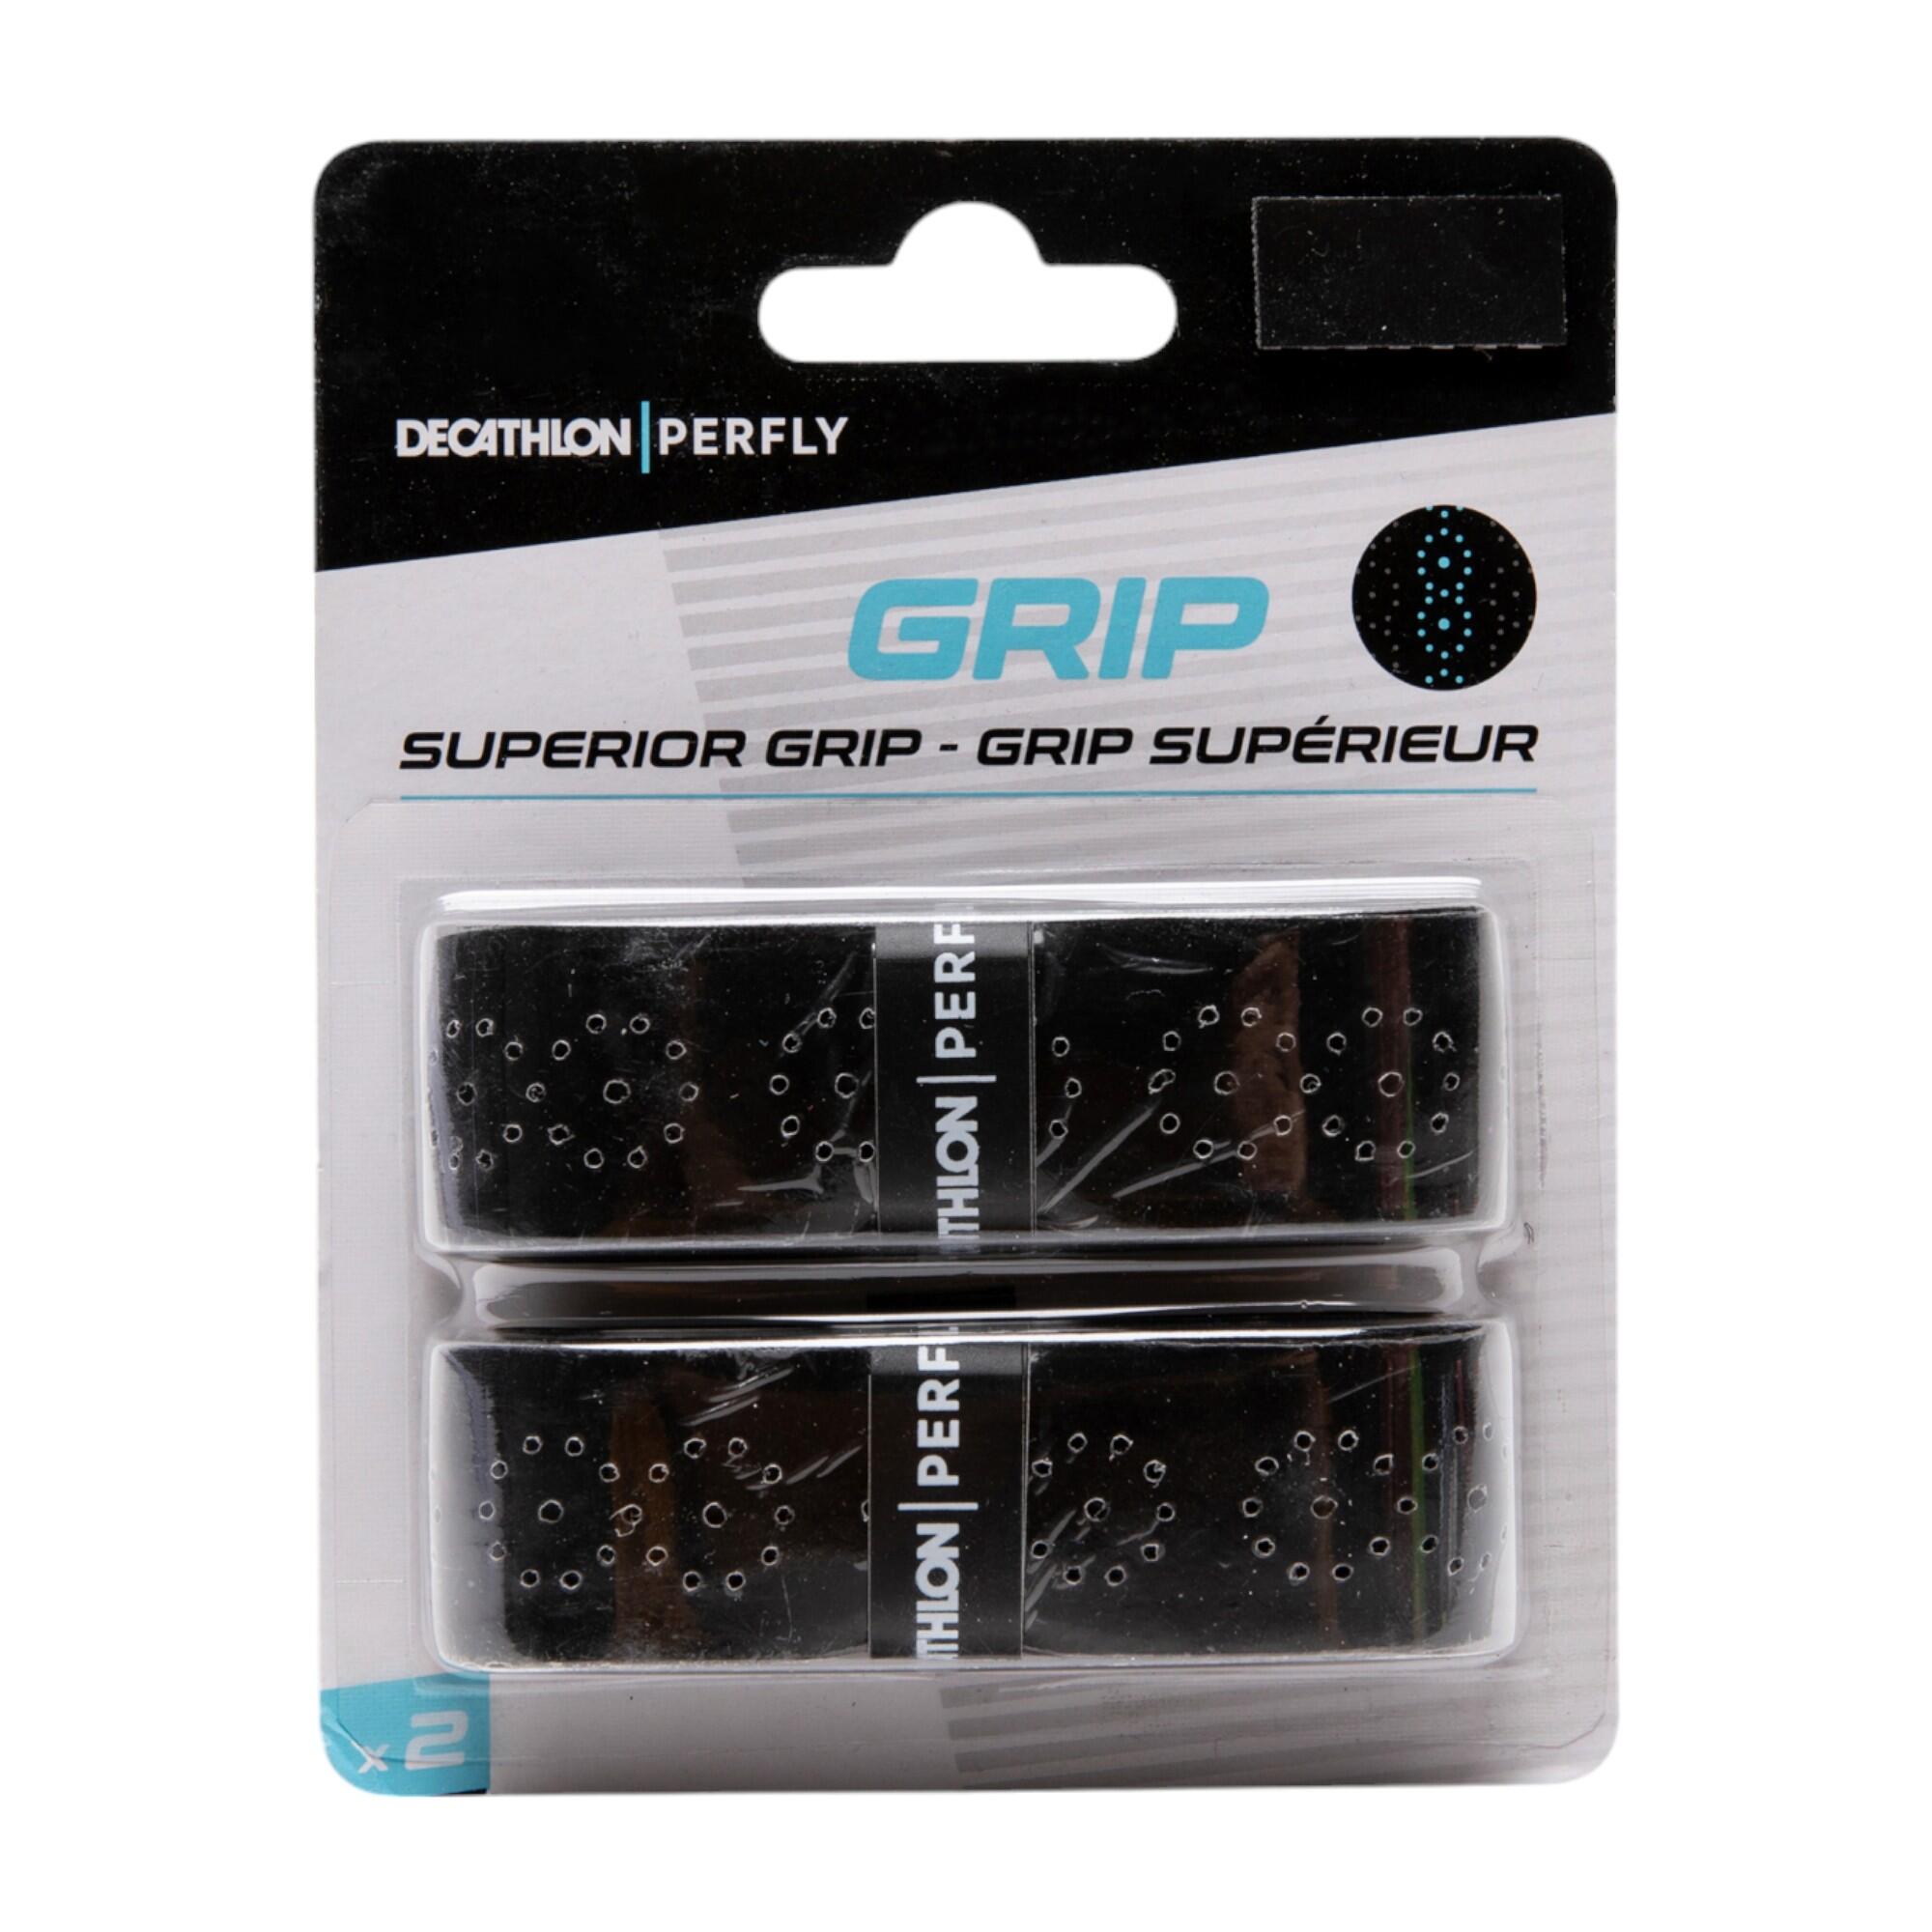 Badminton Grips and Overgrips